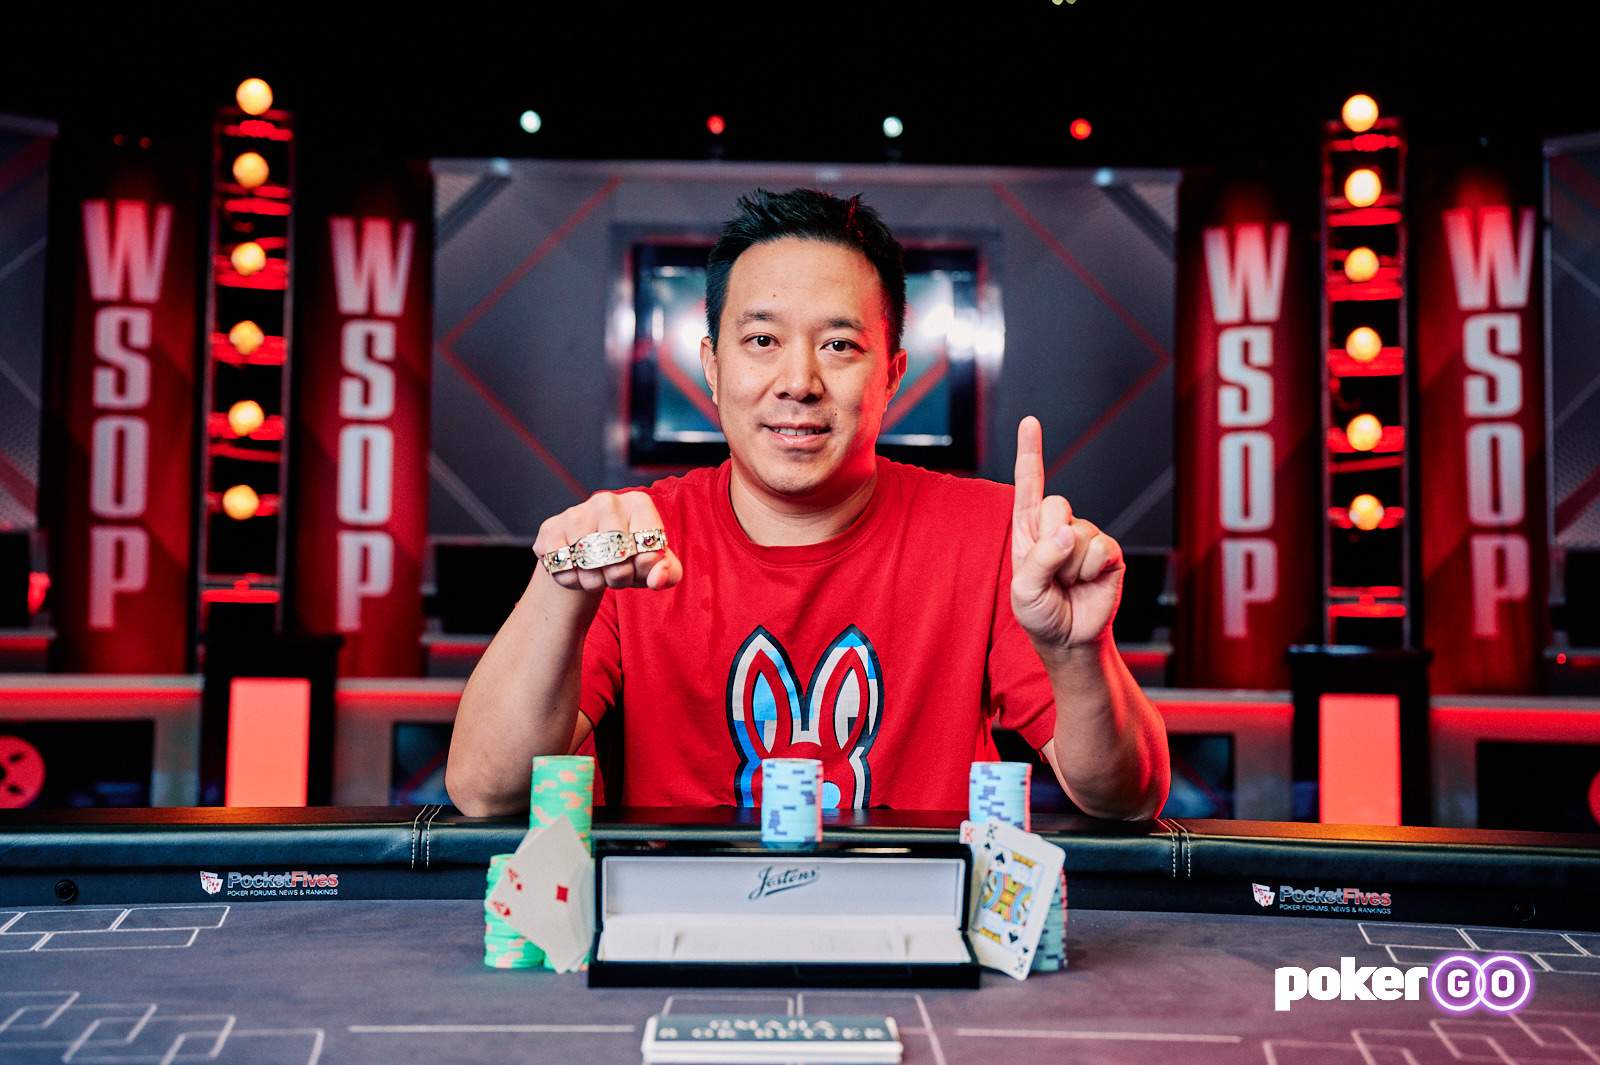 Andrew Yeh Wins WSOP $10,000 H.O.R.S.E. and $487,129